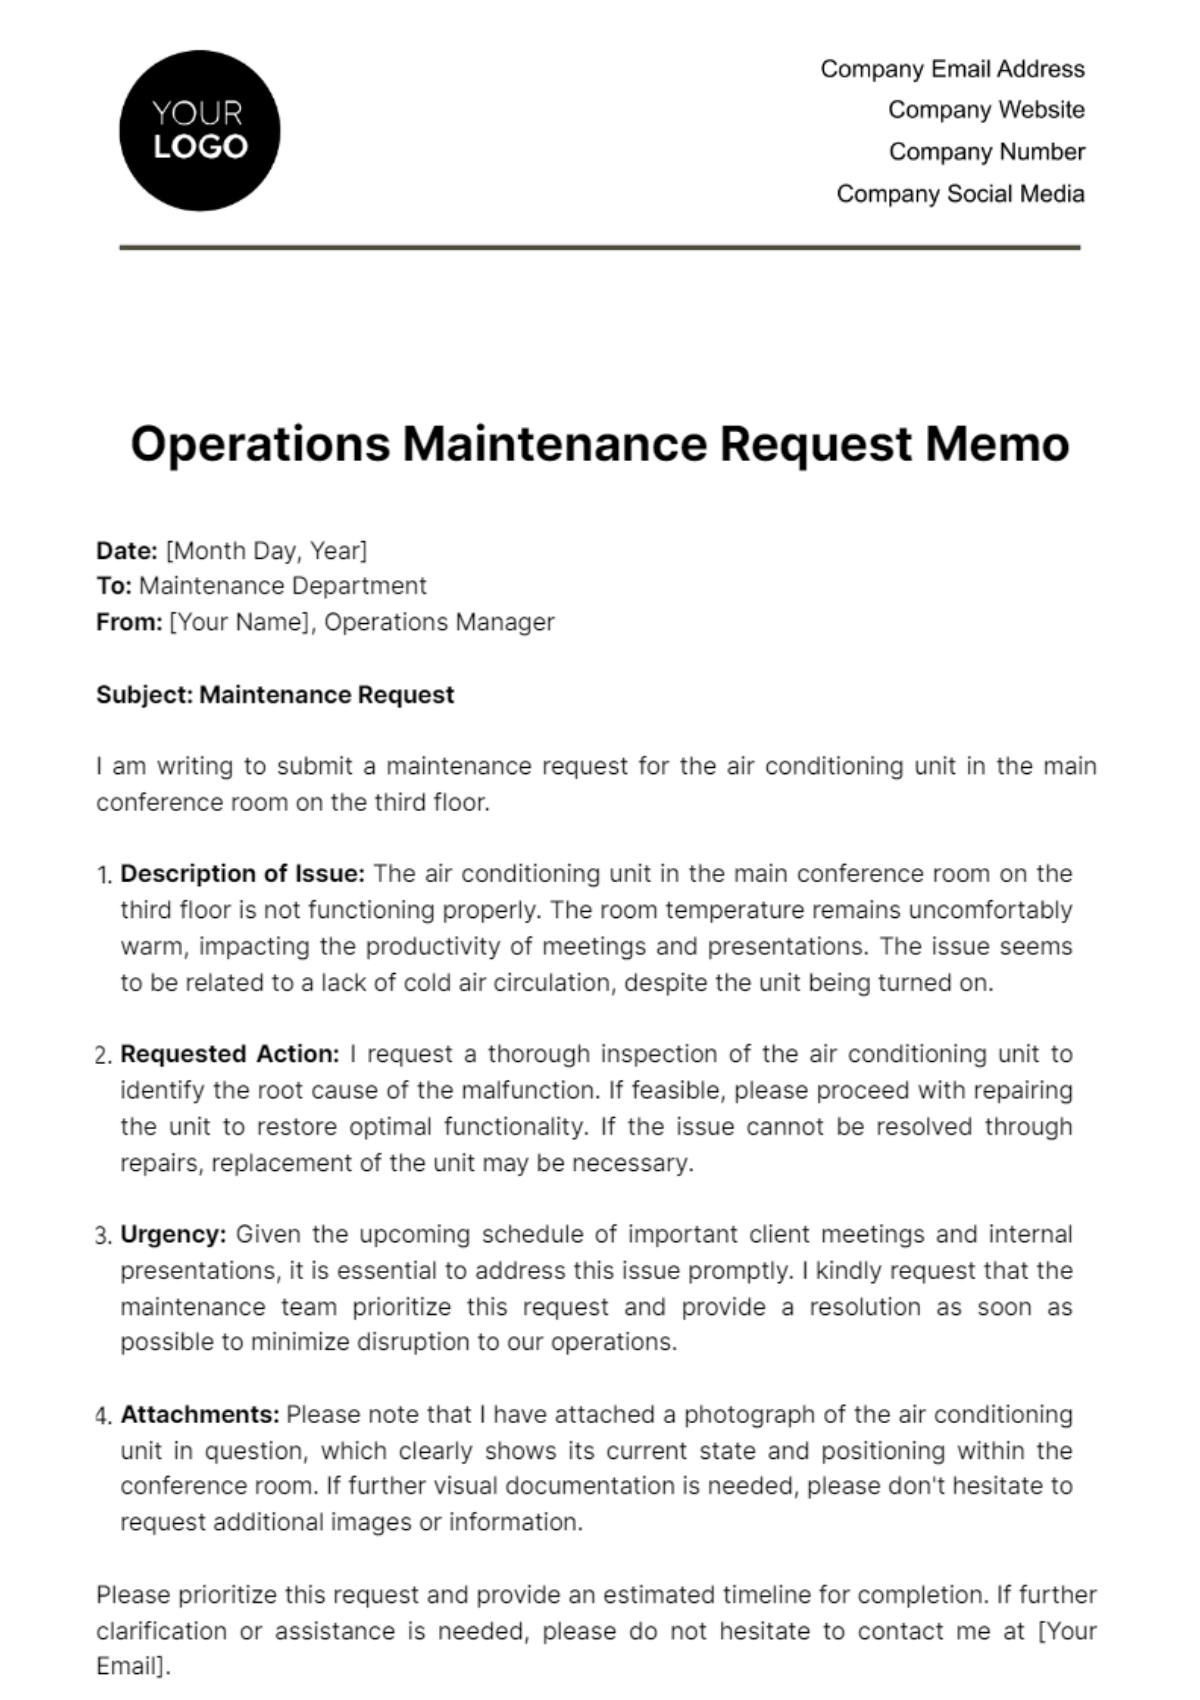 Operations Maintenance Request Memo Template